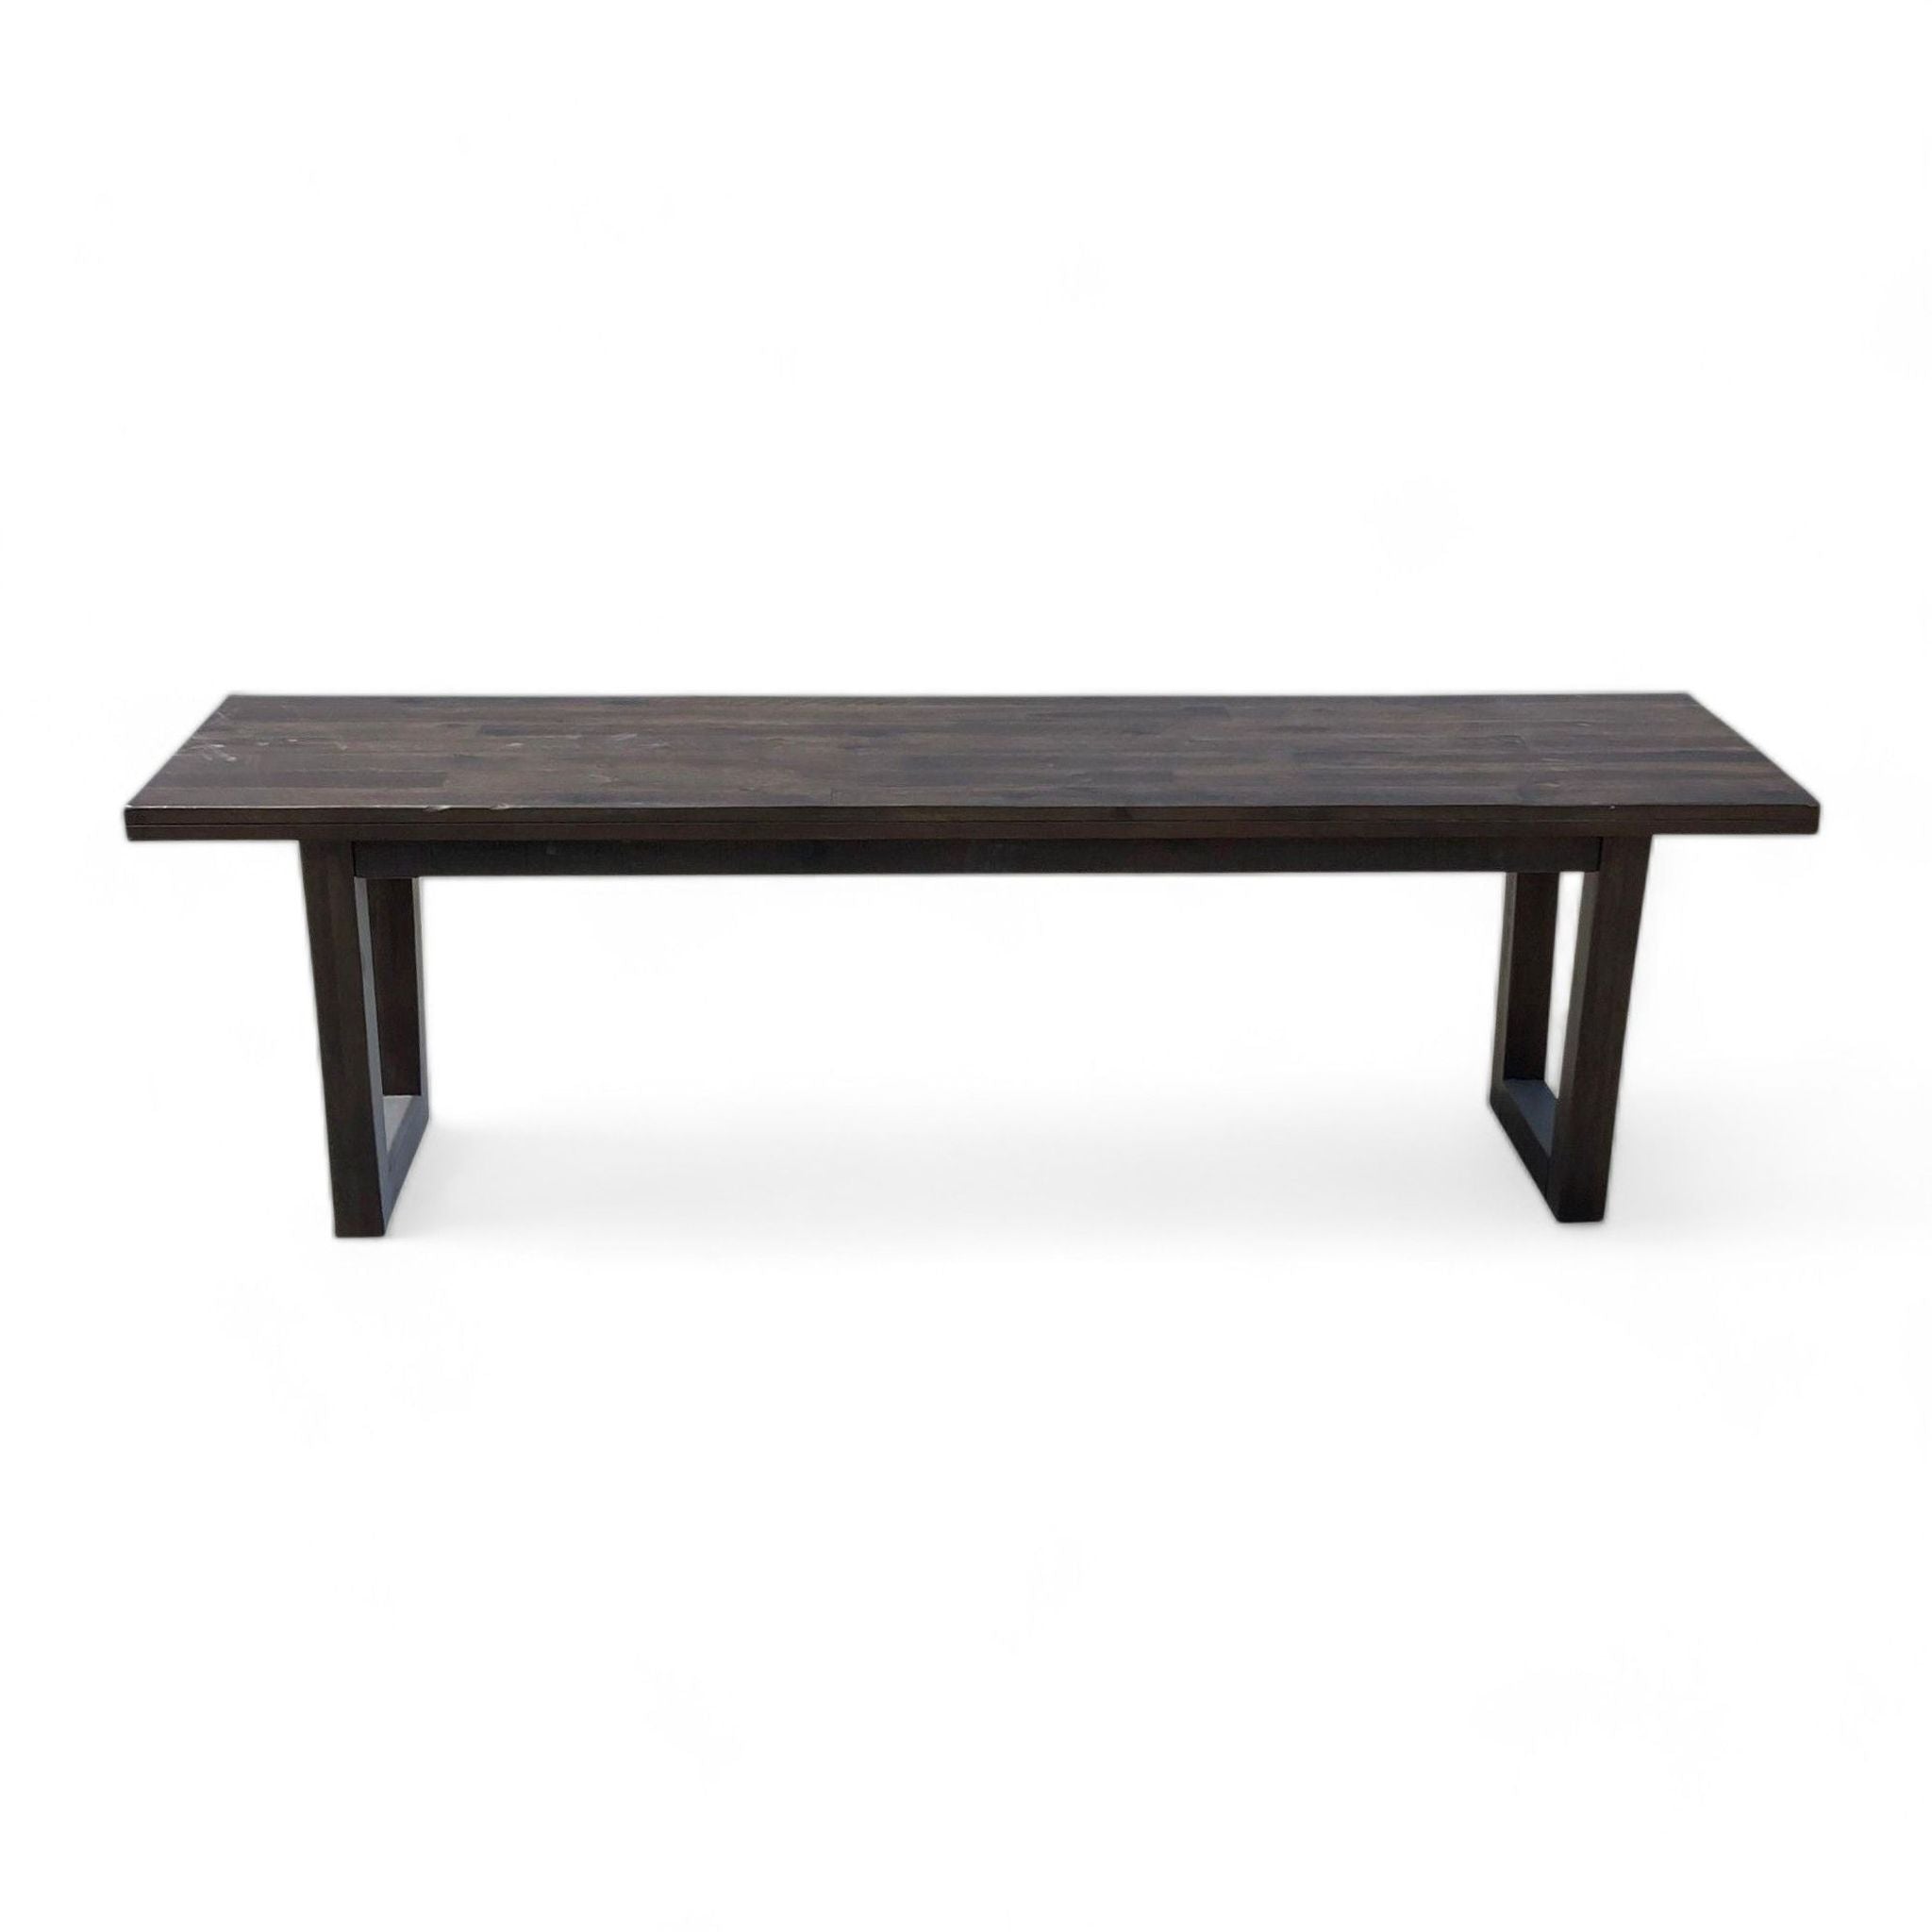 Alt text 1: A dark finish, rustic solid wood dining bench with sleek metal legs, from West Elm's furniture collection.